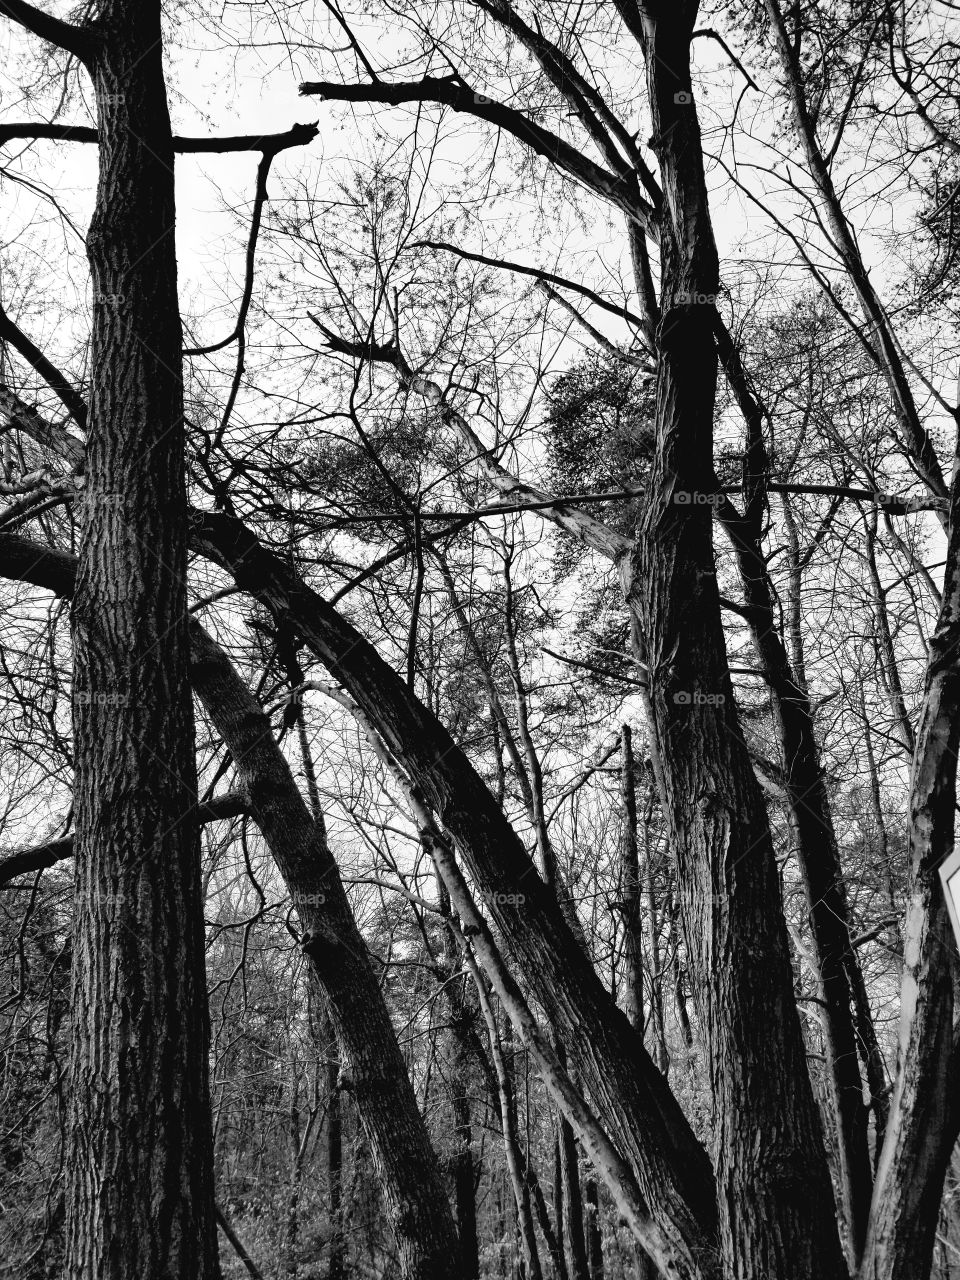 trees in black and white